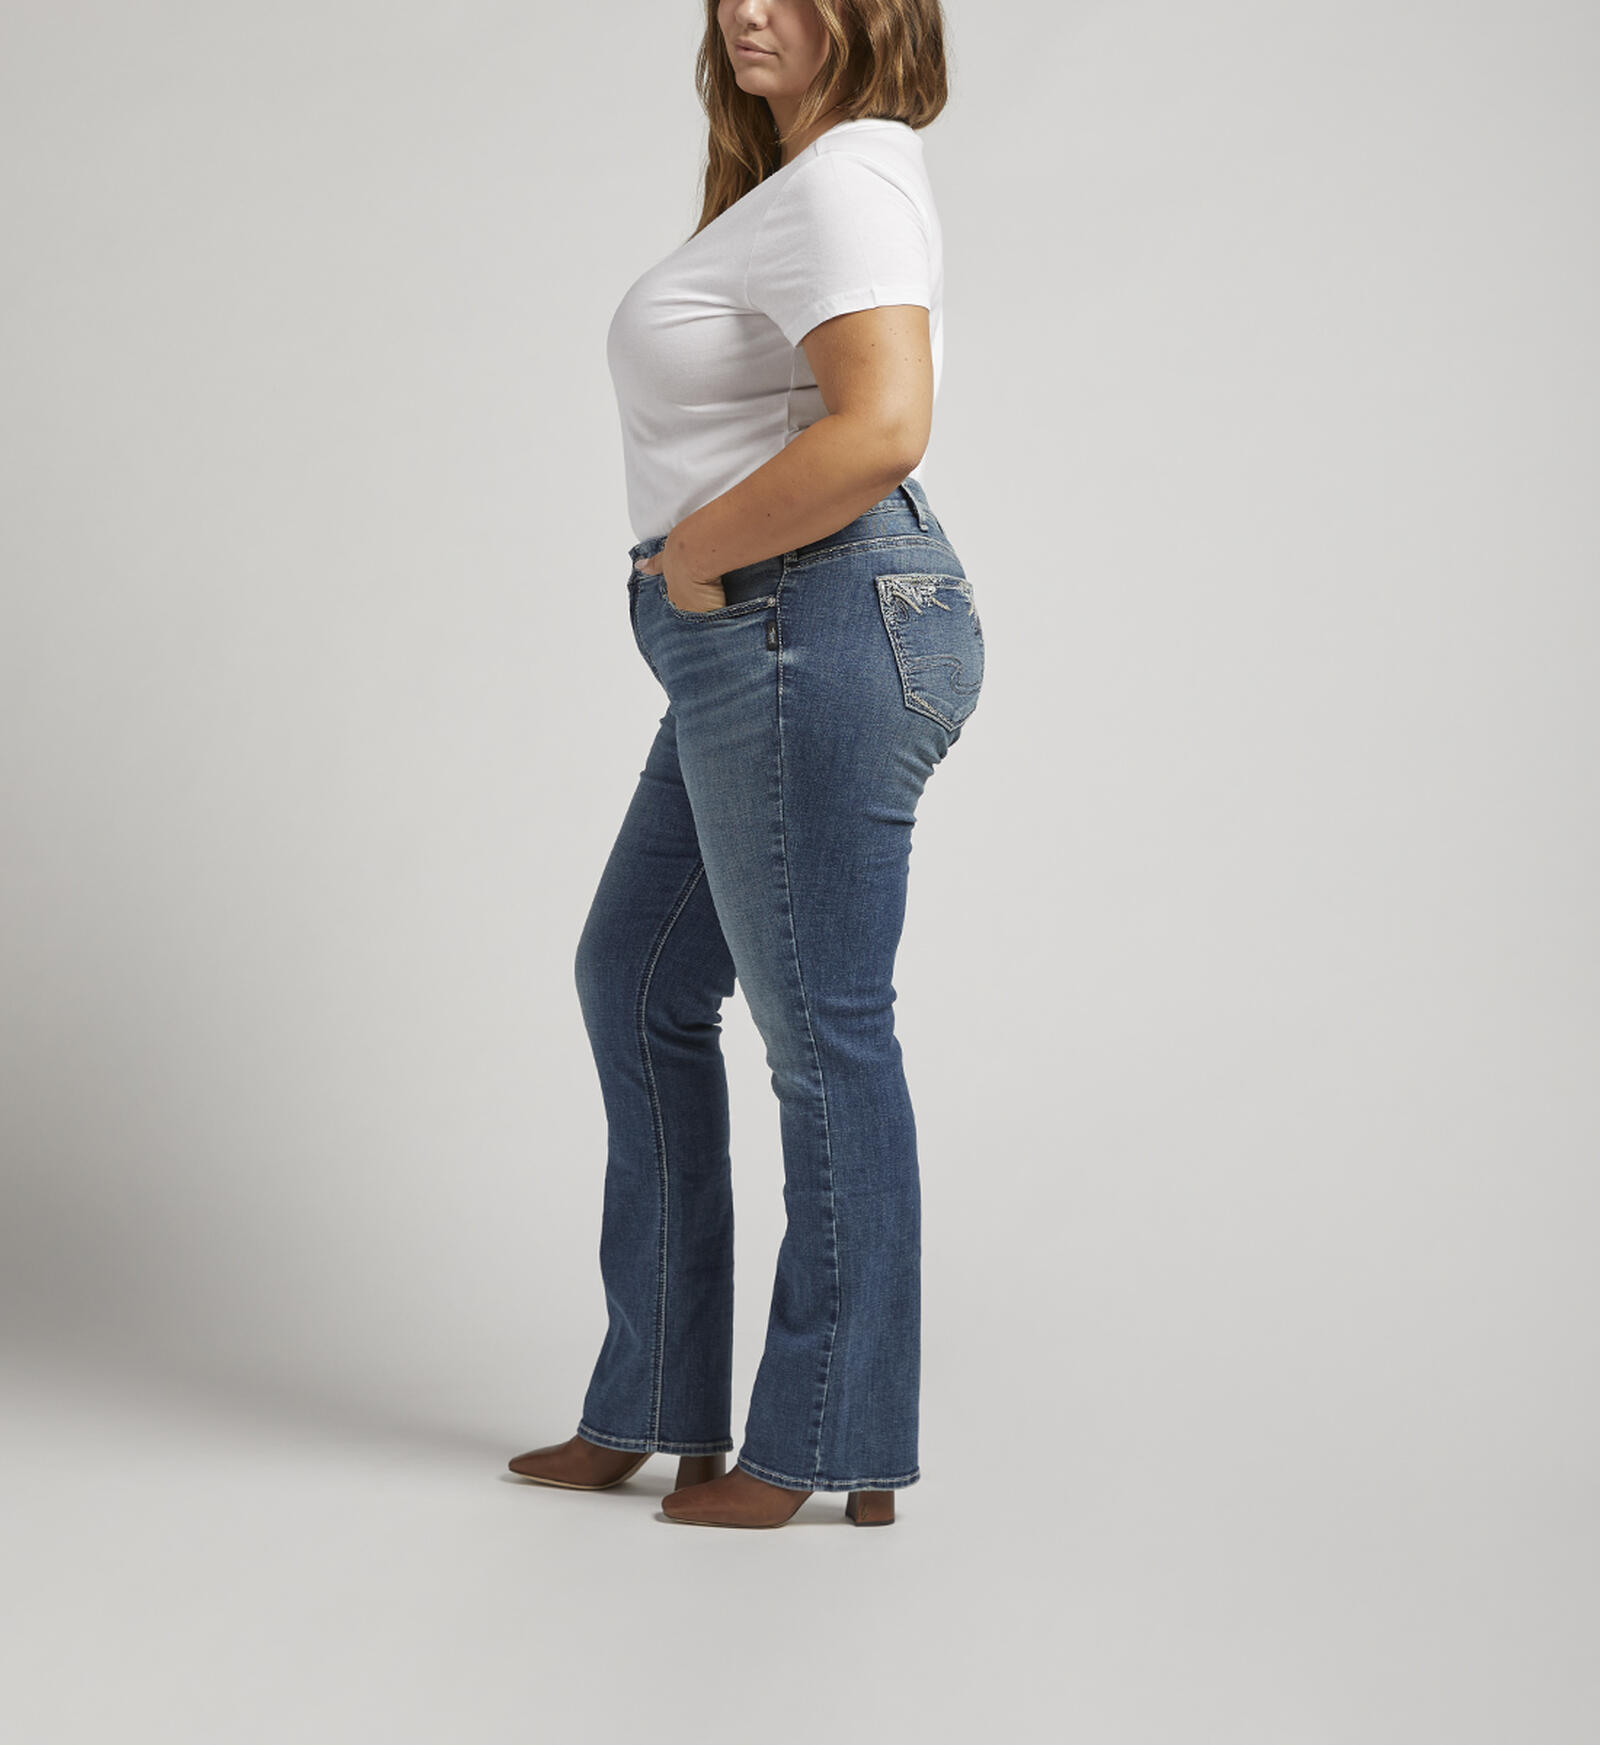 Buy Elyse Mid Rise Slim Bootcut Jeans Plus Size for CAD 114.00